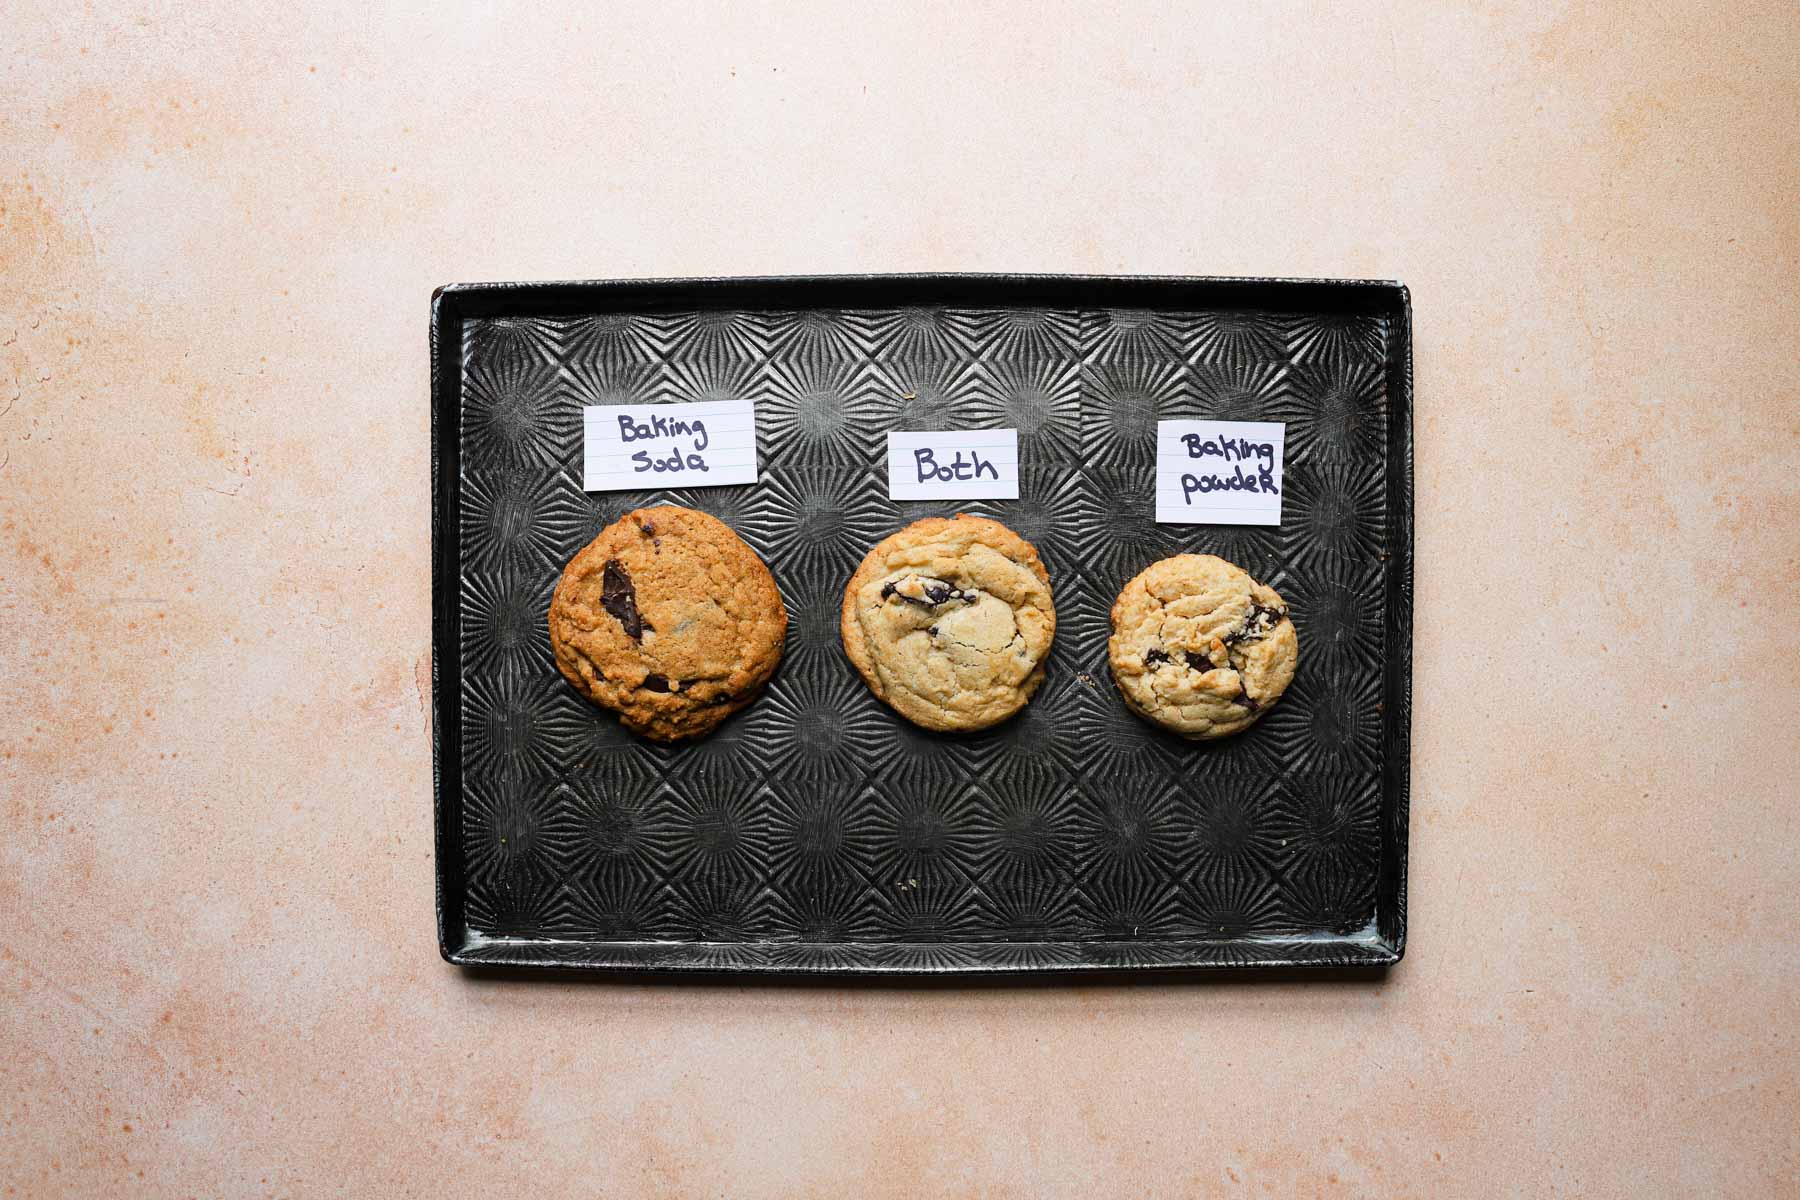 A tray with 3 cookies on it.